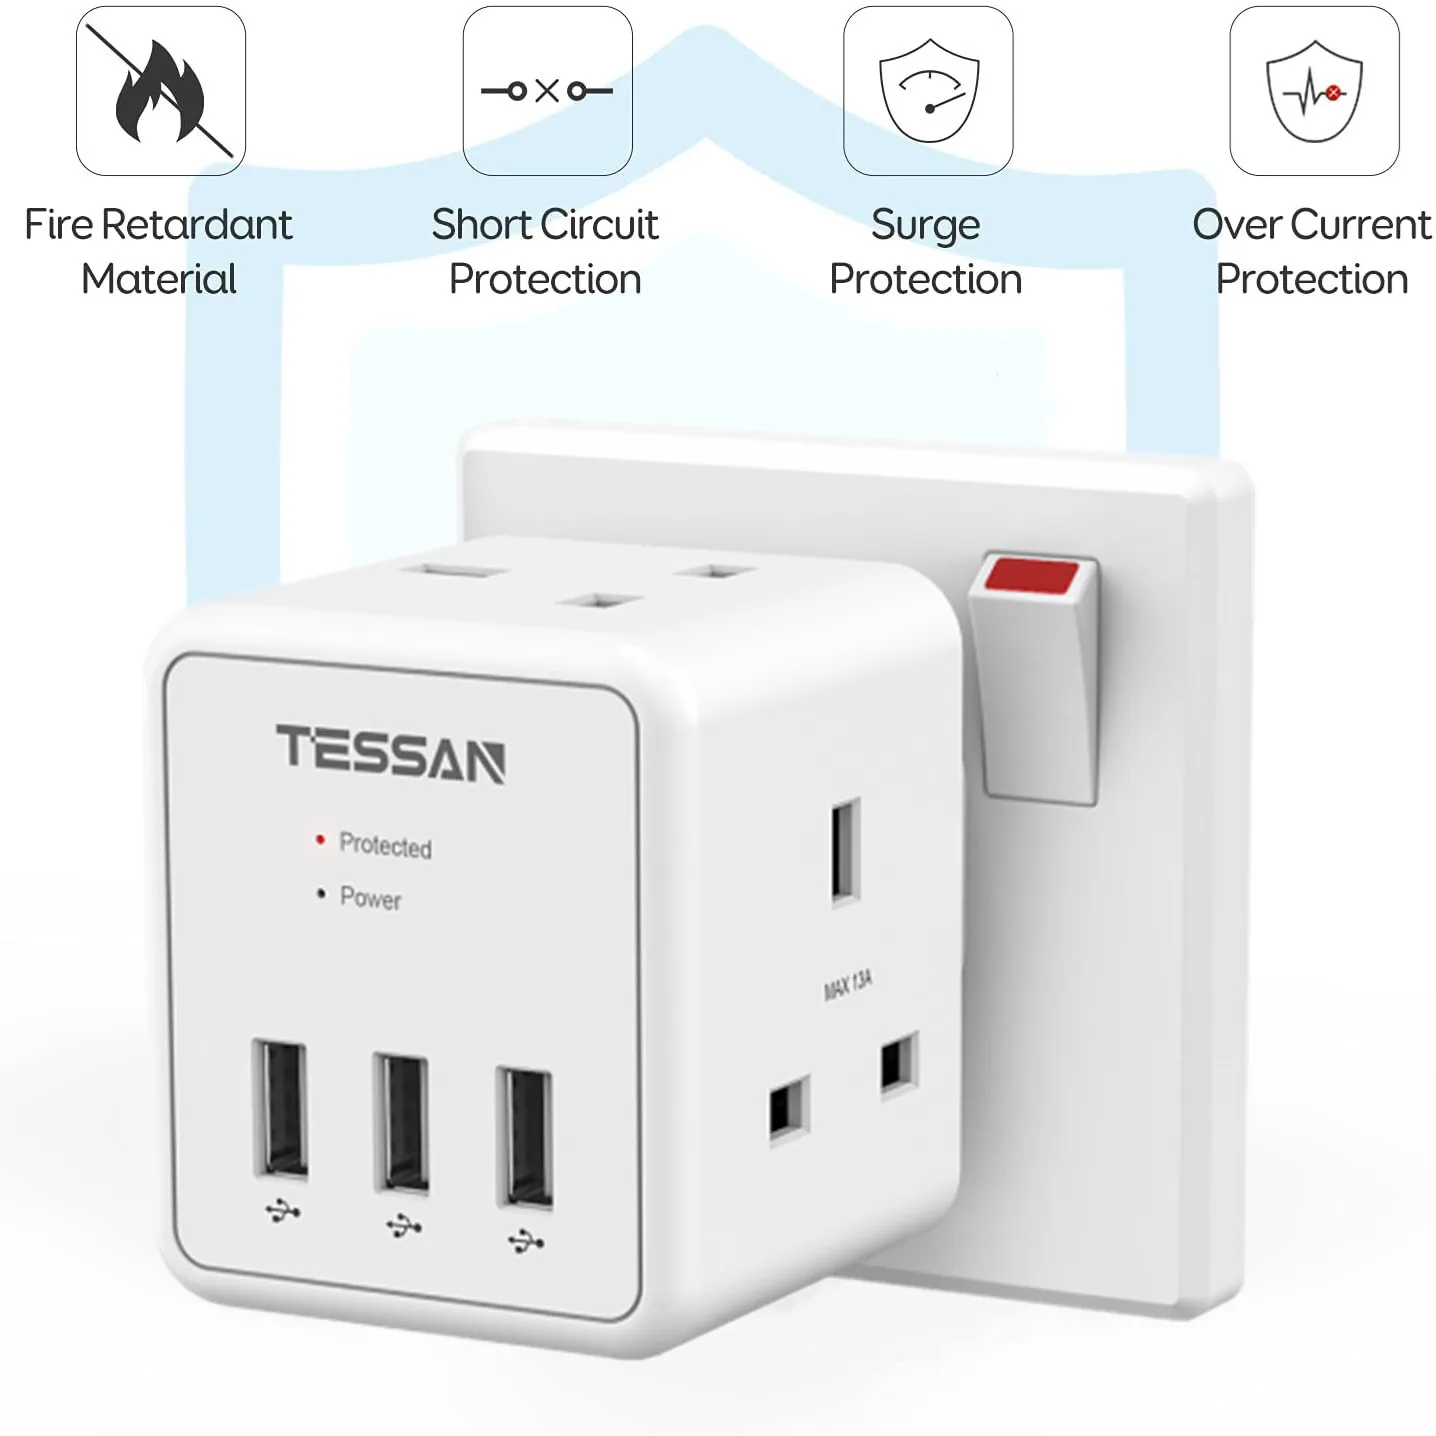 

TESSAN UK Plug USB Wall Socket Power Strip Cube With 2 UK Outlets 3 USB Ports Surge Protection Wall Charger Adapter for Home